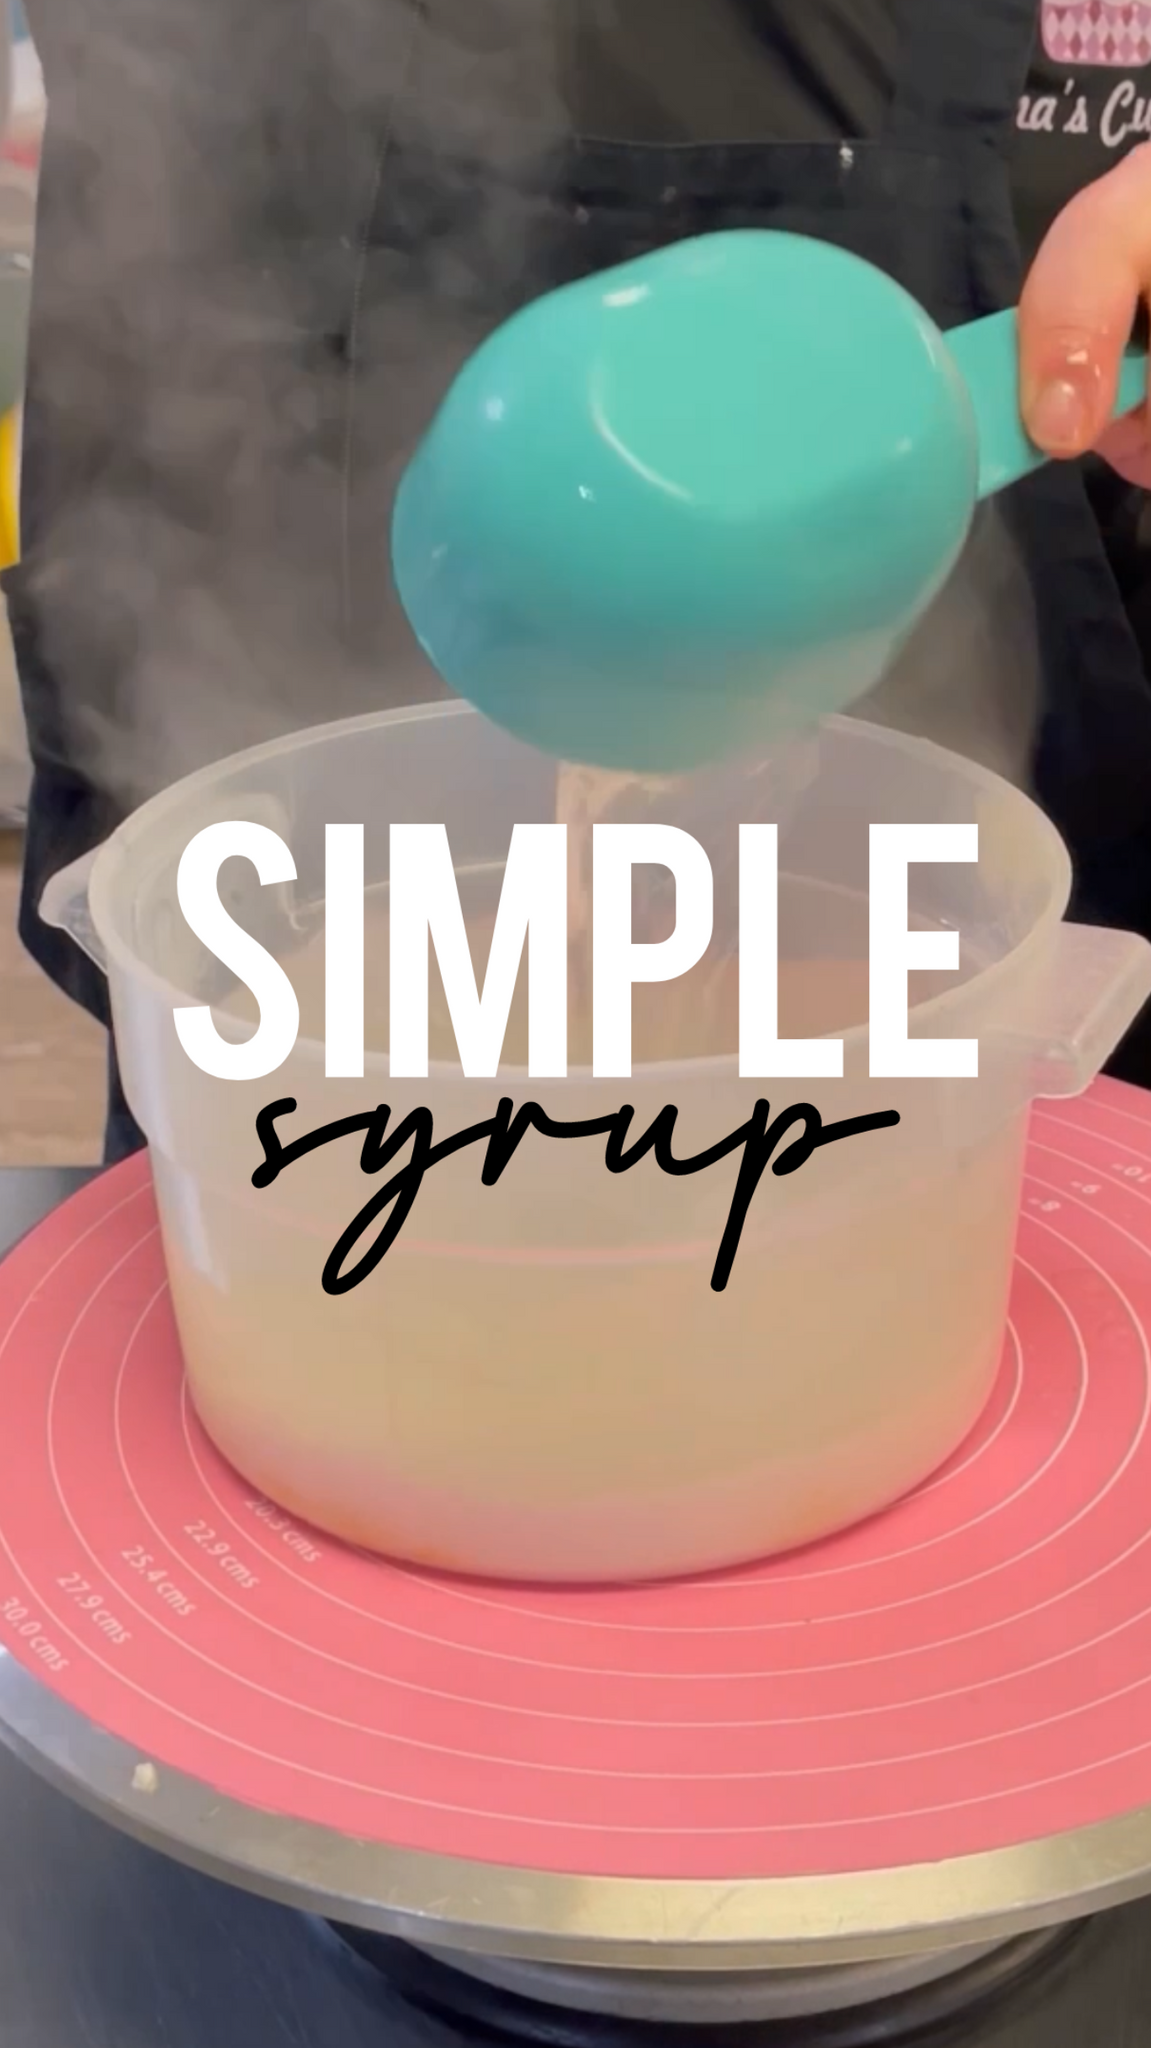 SIMPLE SYRUP